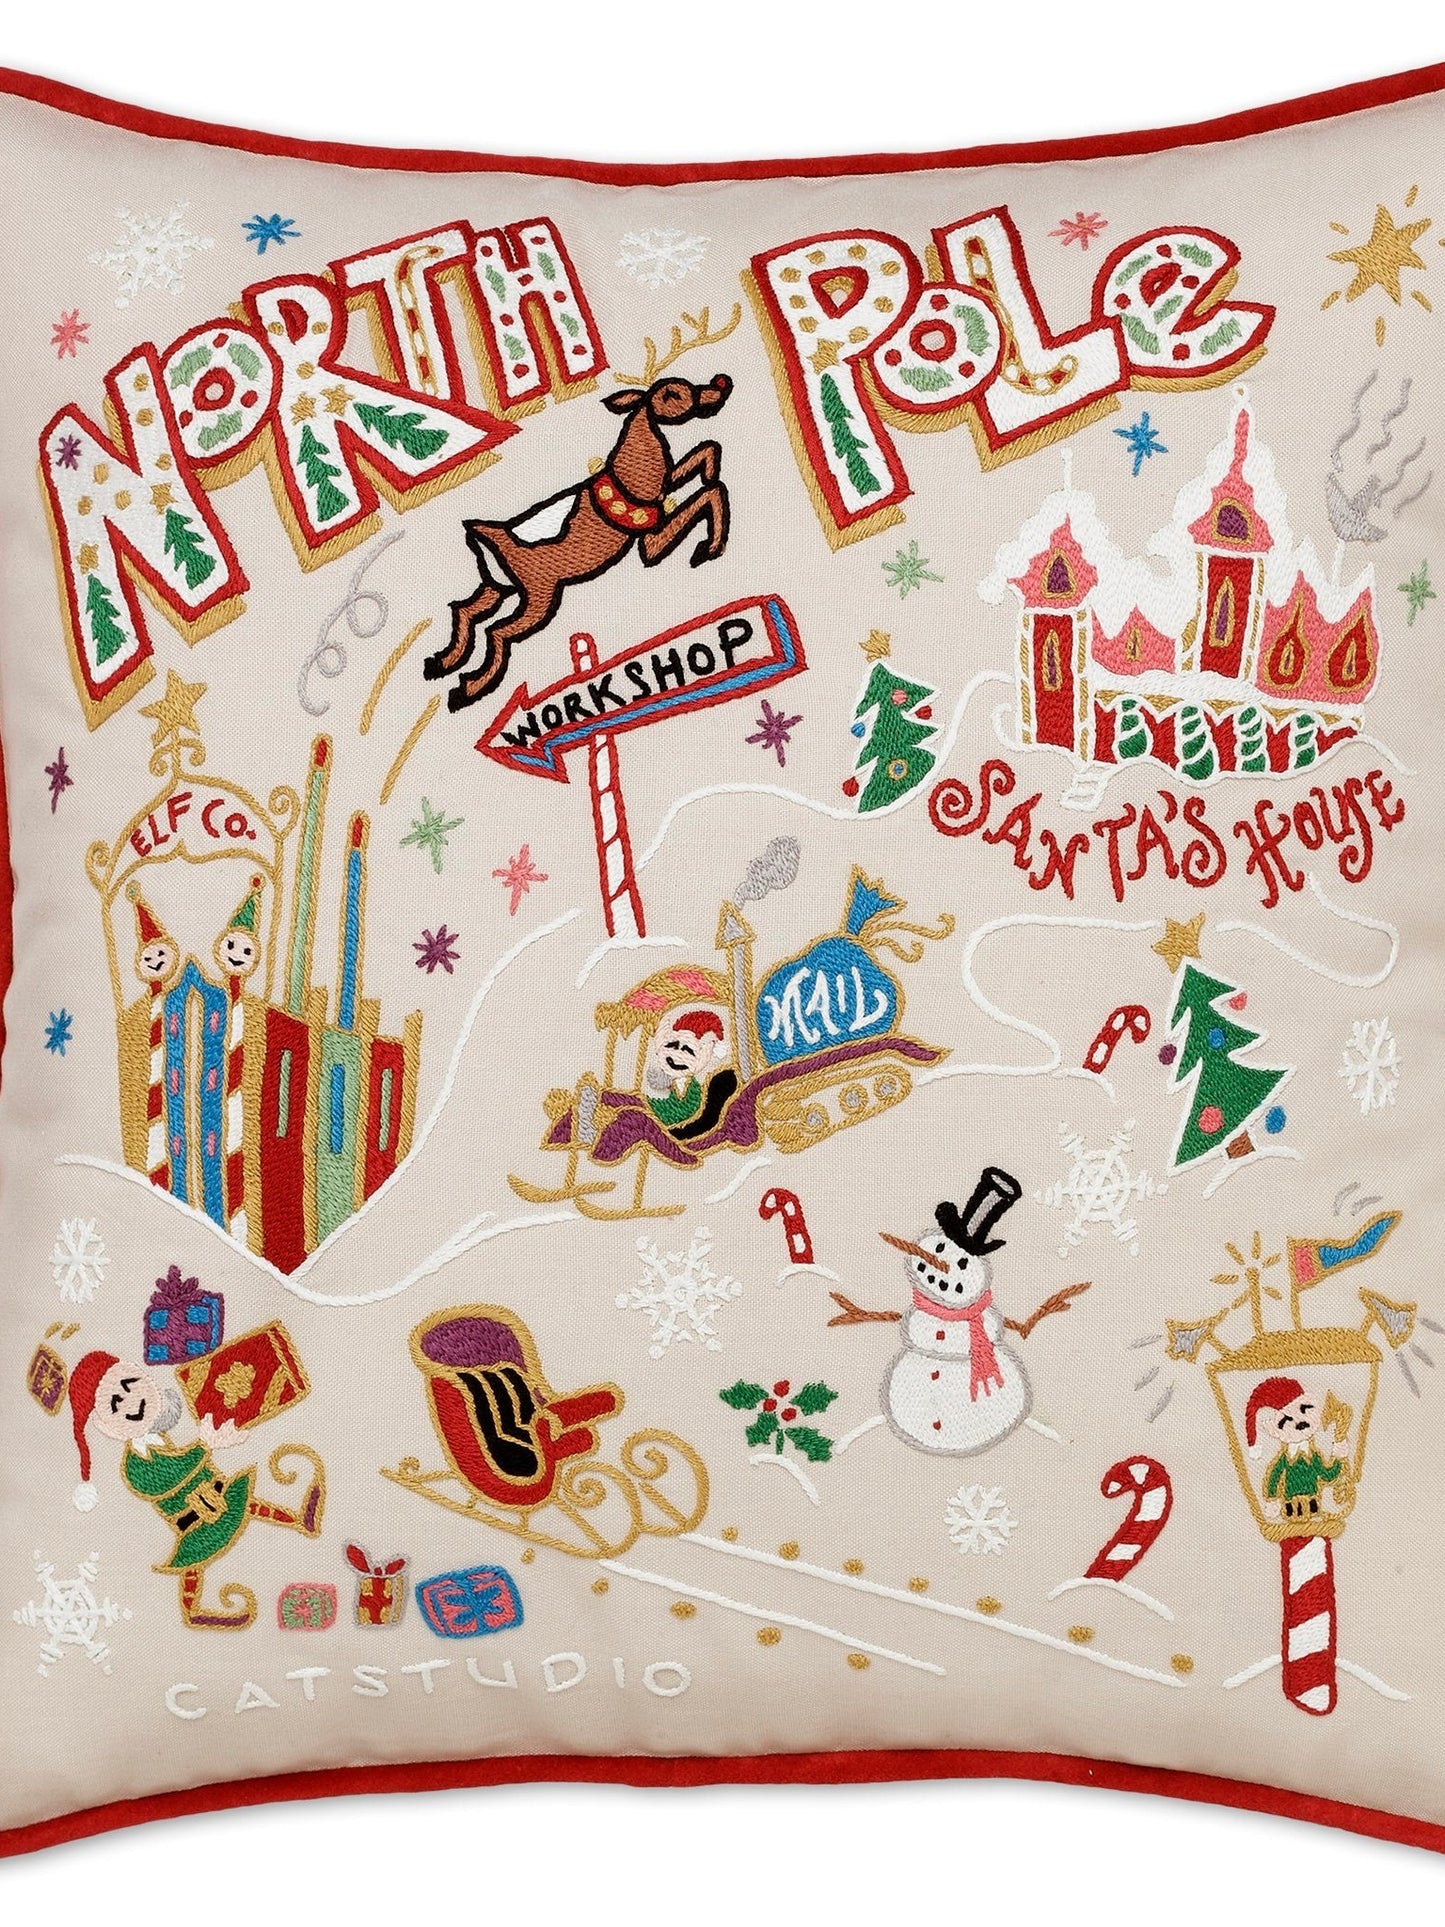 The North Pole Pillow